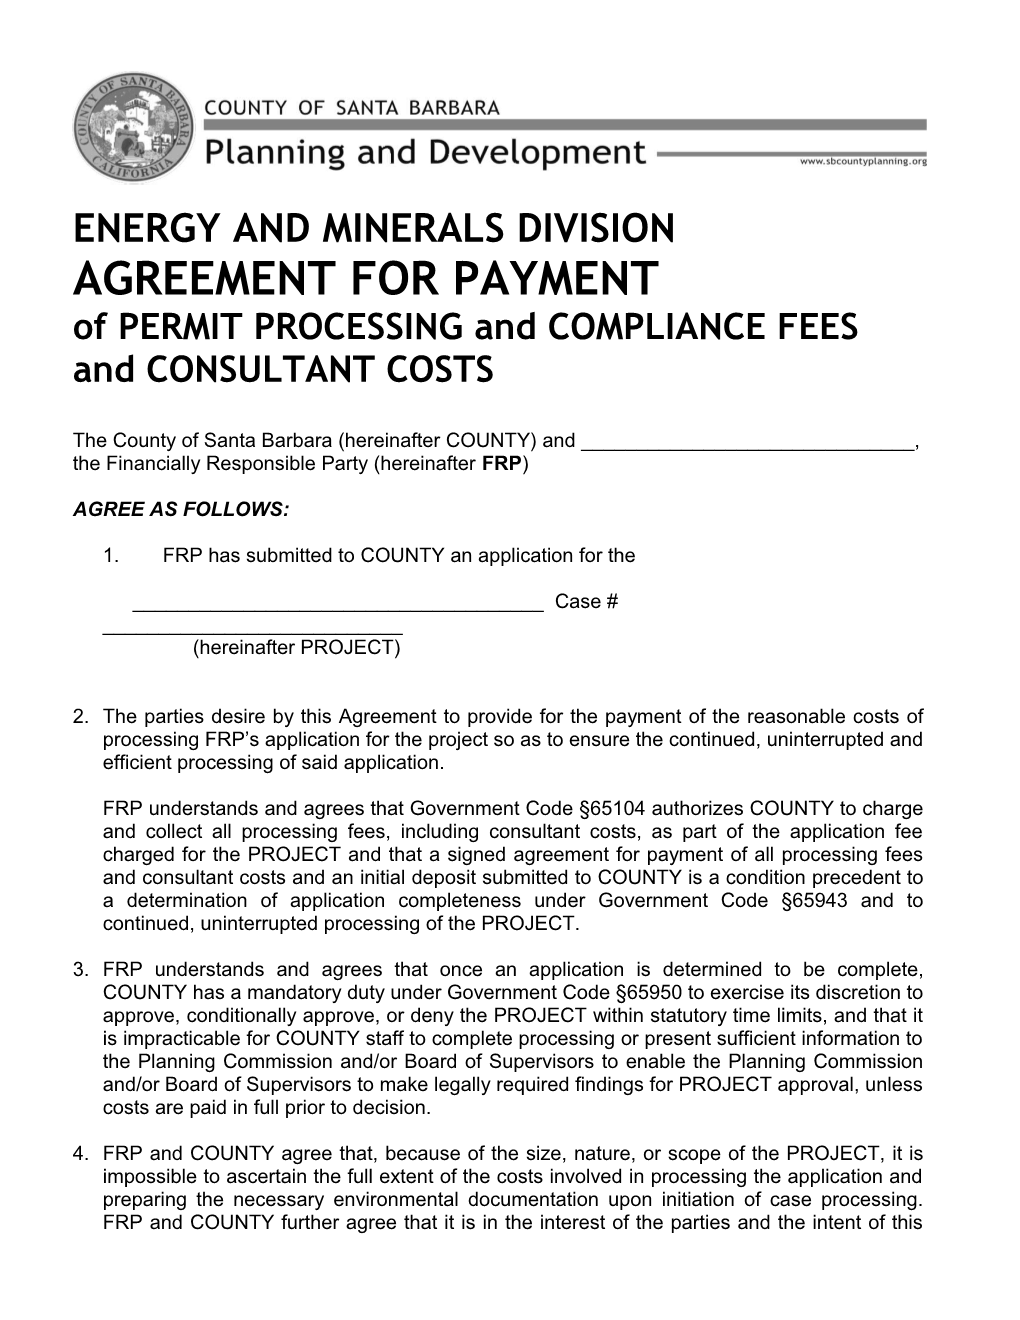 Santa Barbara County Energy and Minerals Division Agreement to Pay